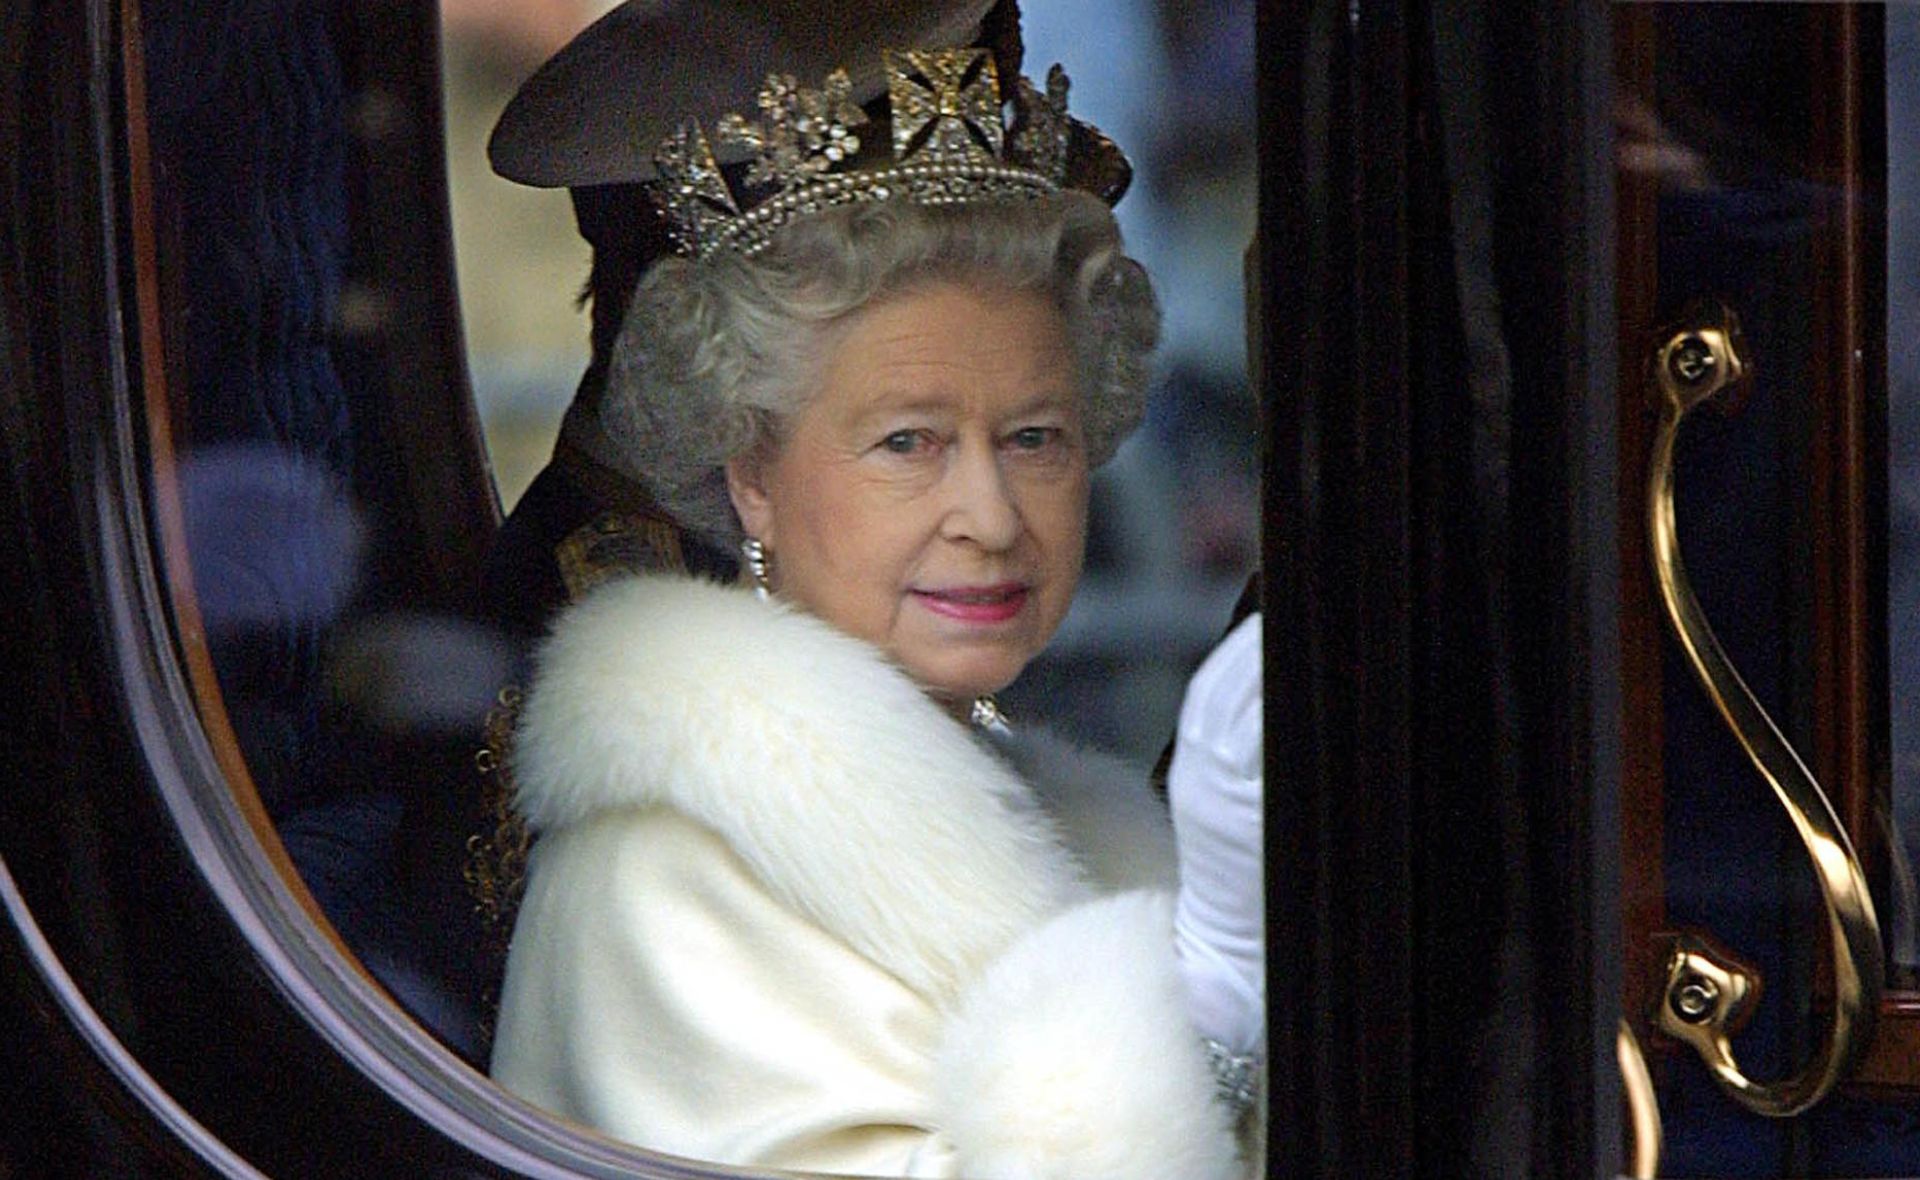 Queen Elizabeth II’s cause of death: Everything we know about how she died after months of health concerns